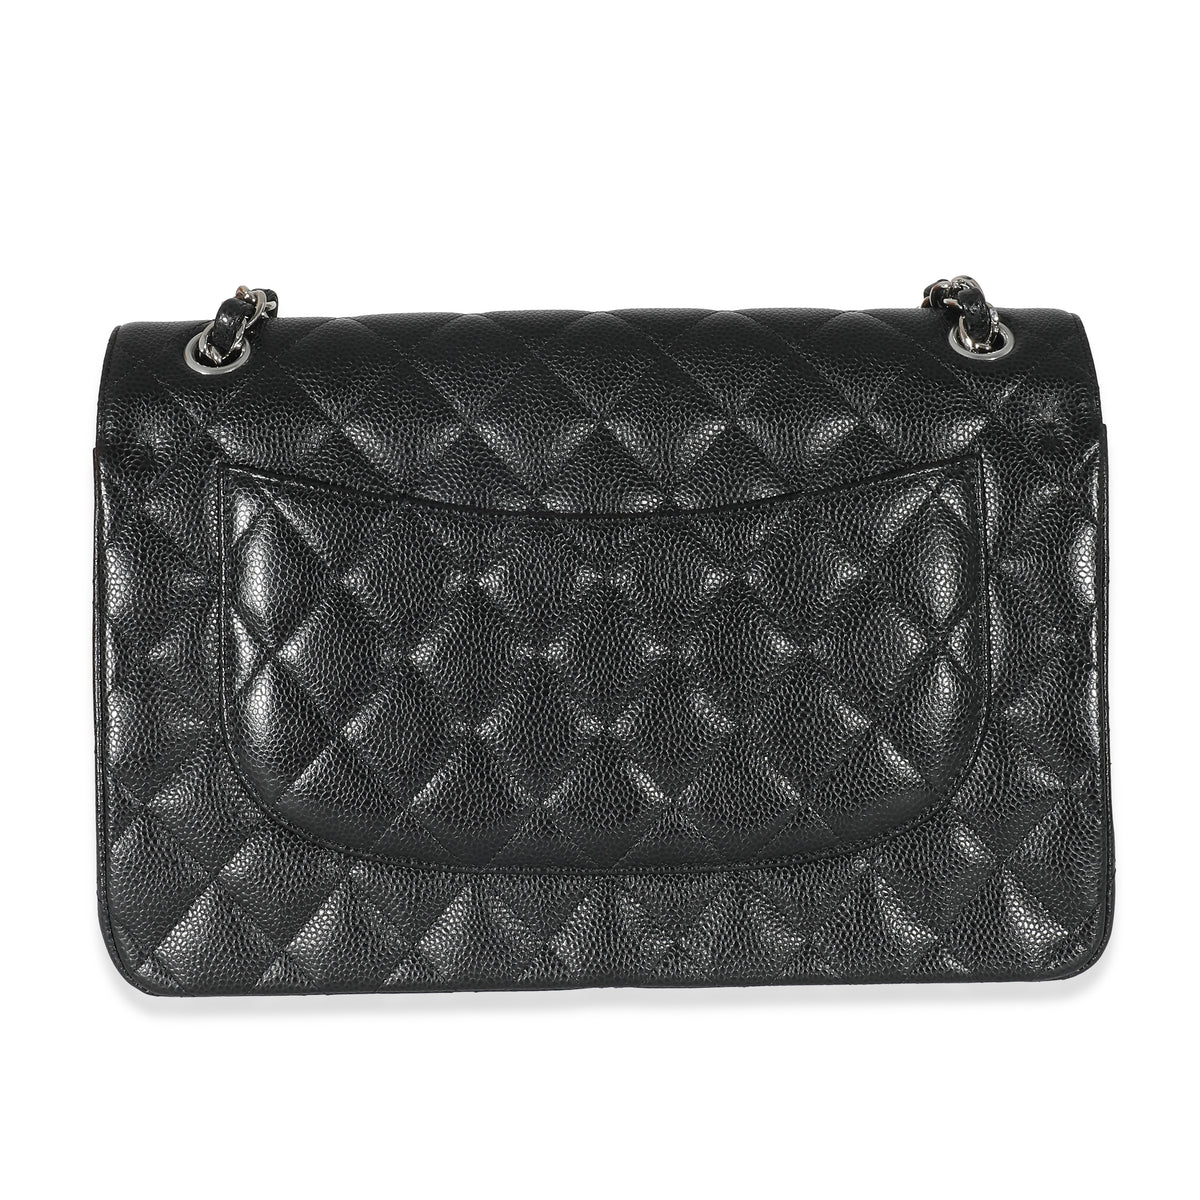 Chanel Black Quilted Lambskin Medium Classic Double Flap Bag, myGemma, CH